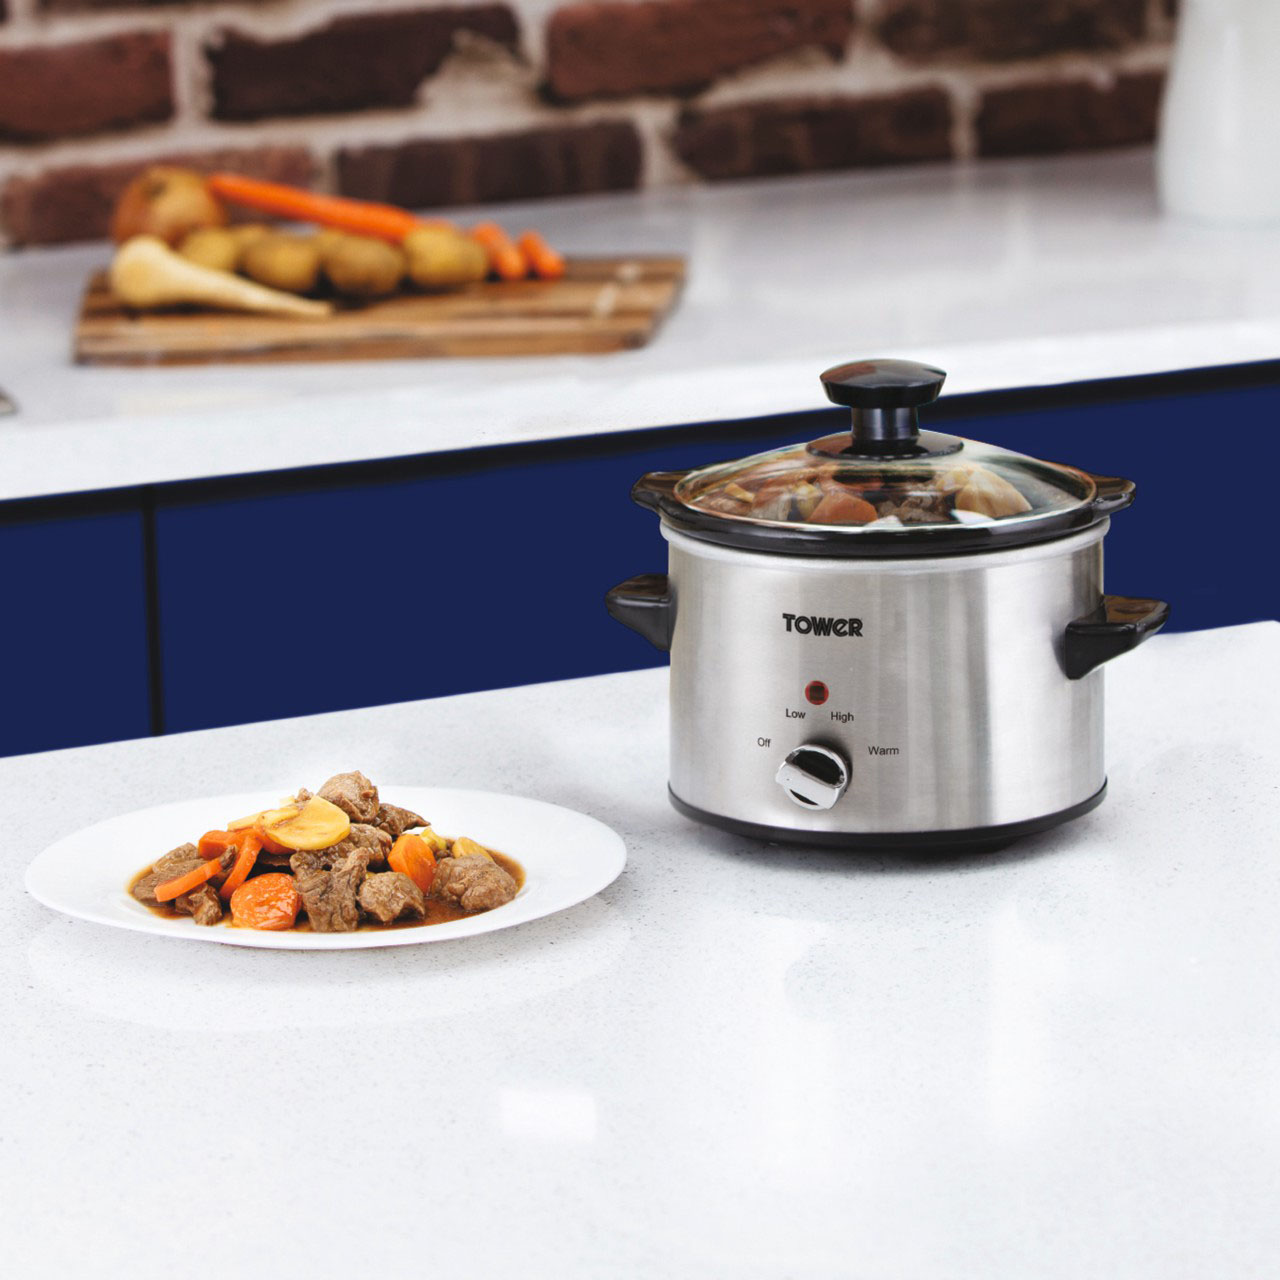 Tower Stainless Steel Mini Slow Cooker